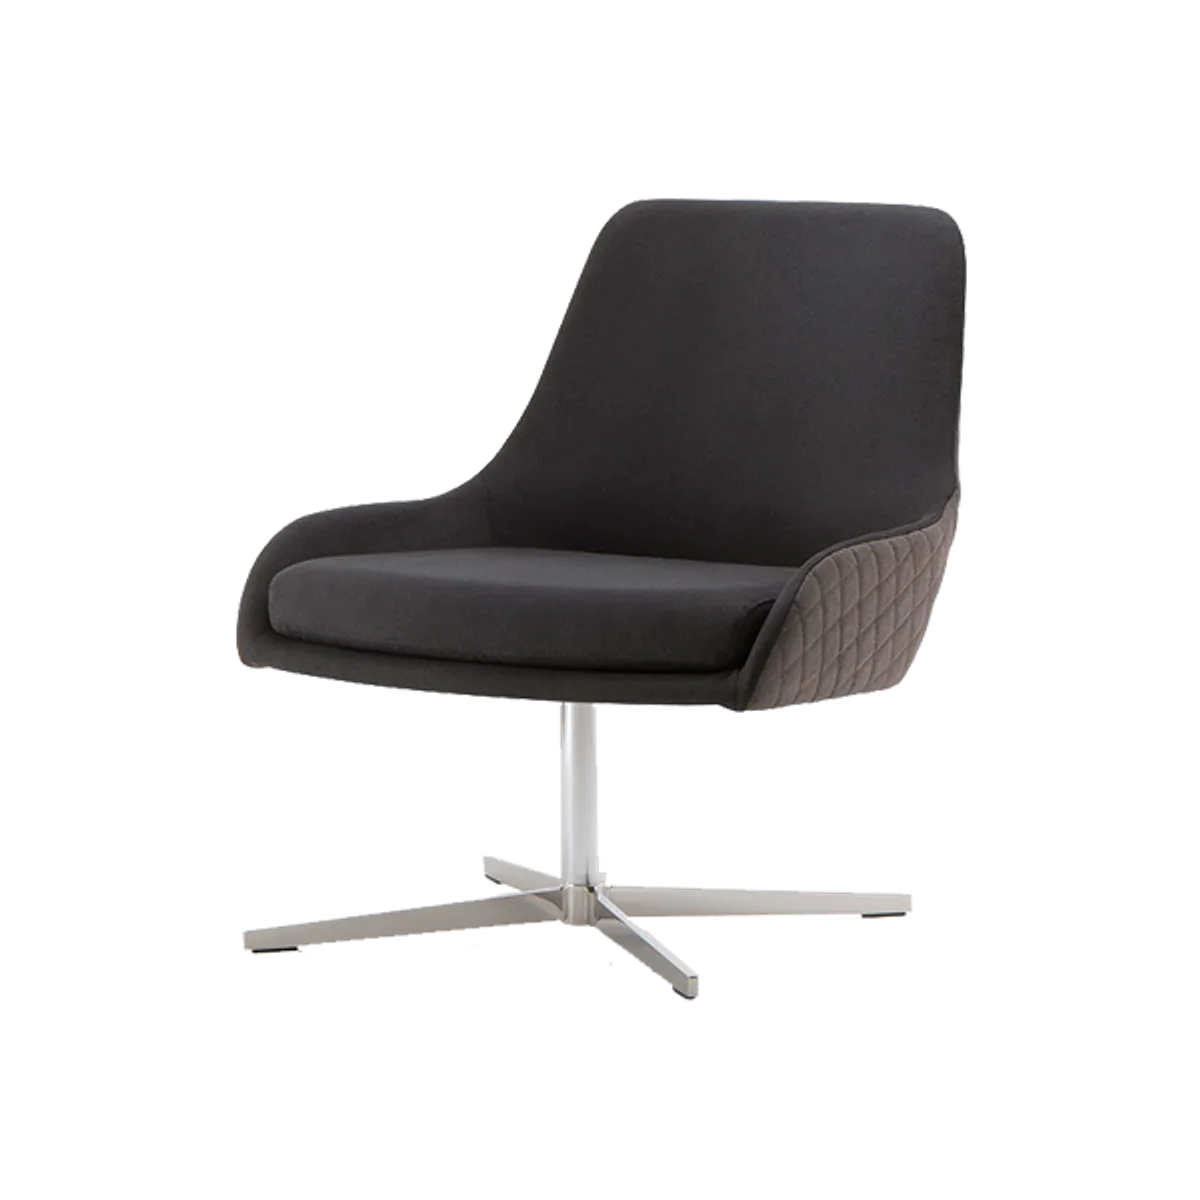 Web Josie 3 Lounge Chair Furniture With Upholstery And Metal Base